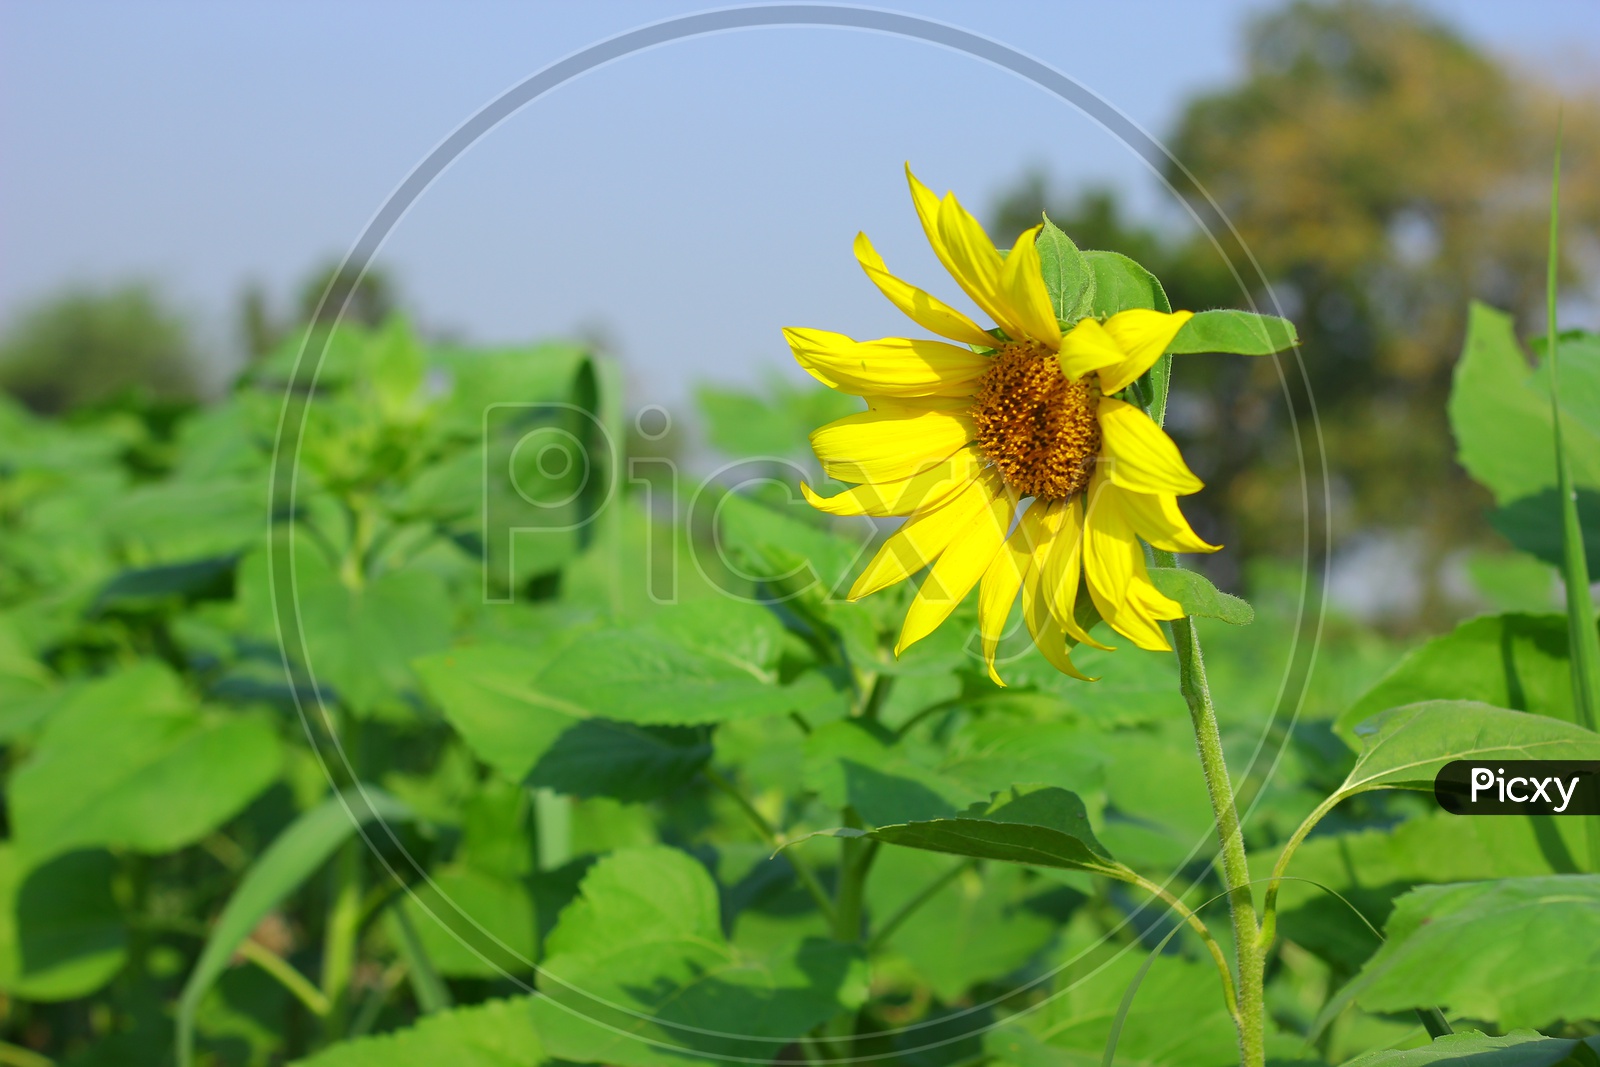 Sunflower Blooming in an Agricultural Feild / Sunflower in a Natural Green Feild  Background